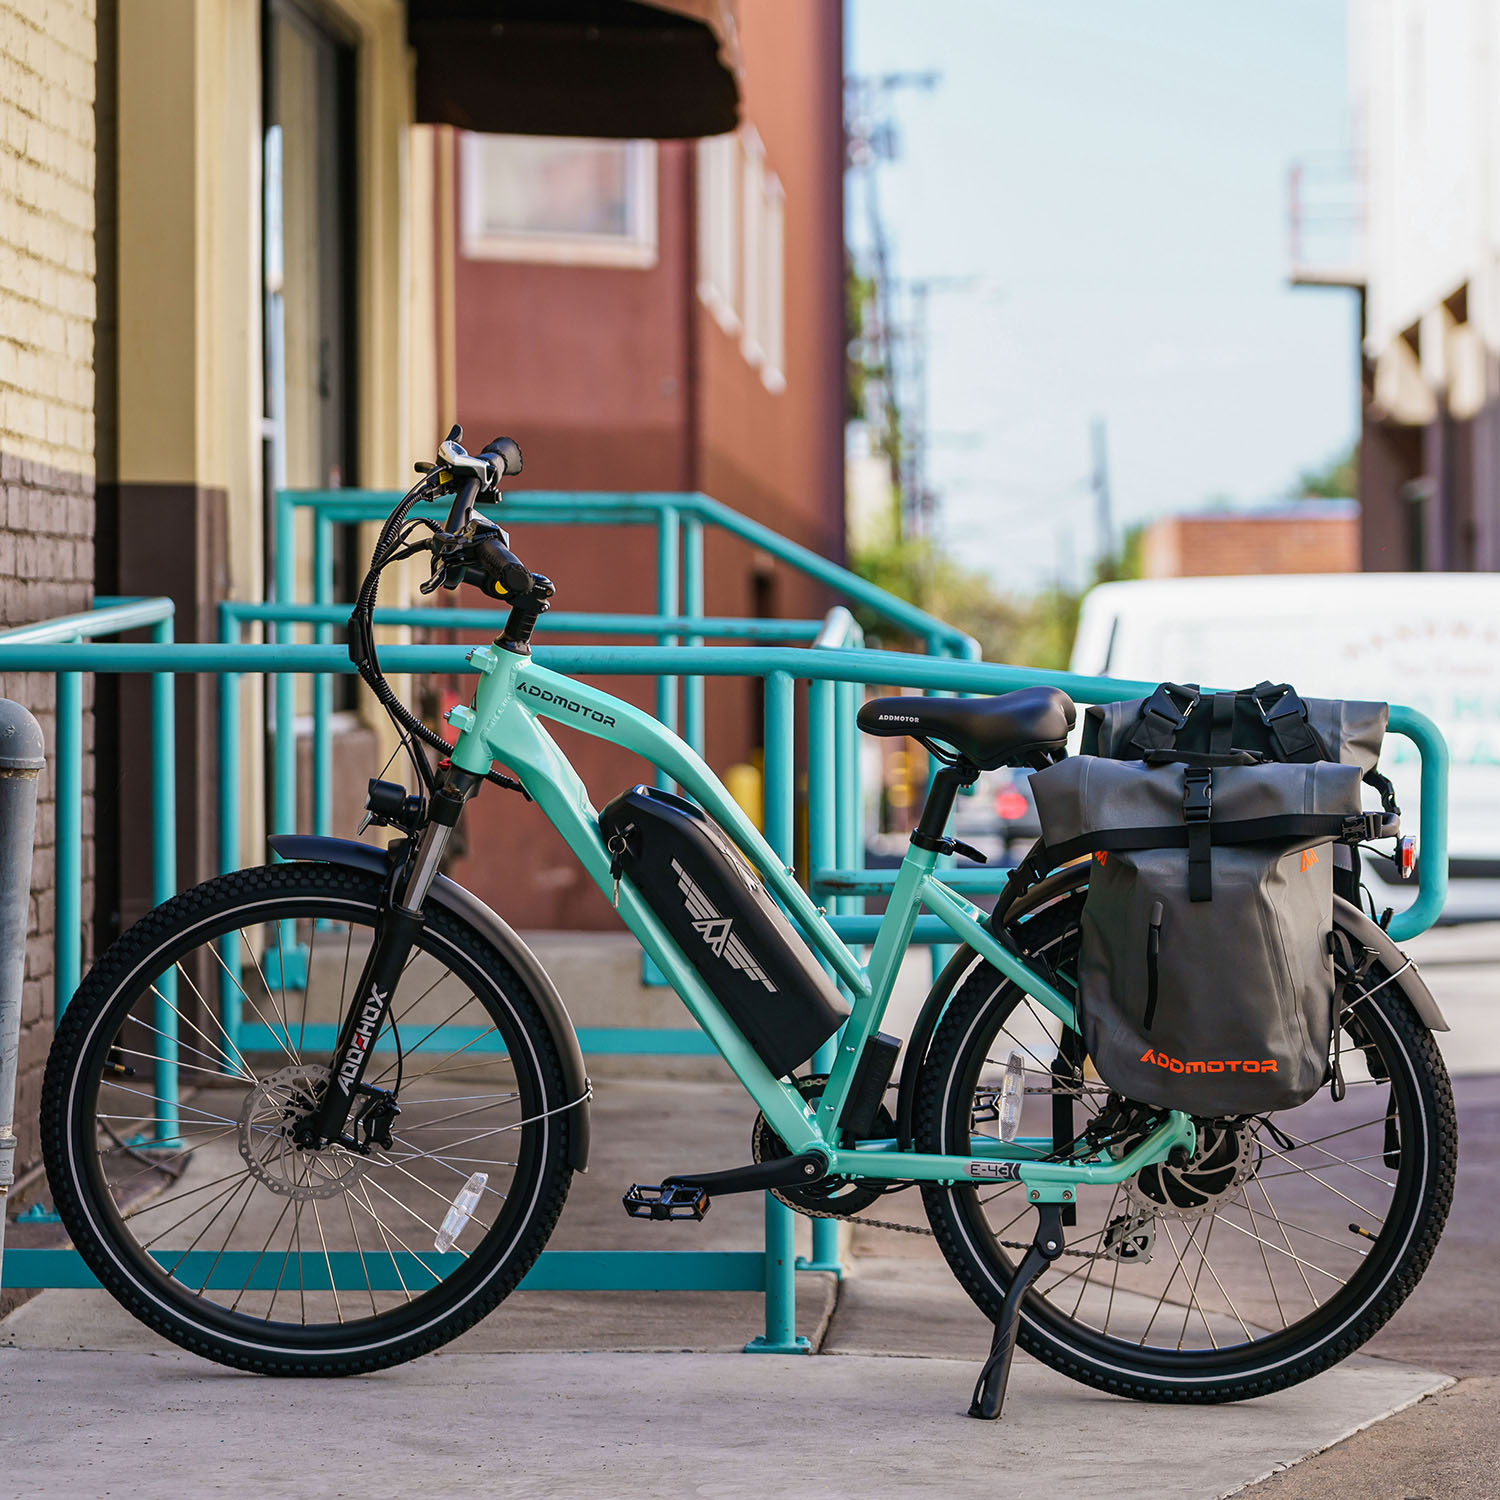 Addmotor CITYPRO E-43 Review - Powerful Electric Bike with Impressive Range